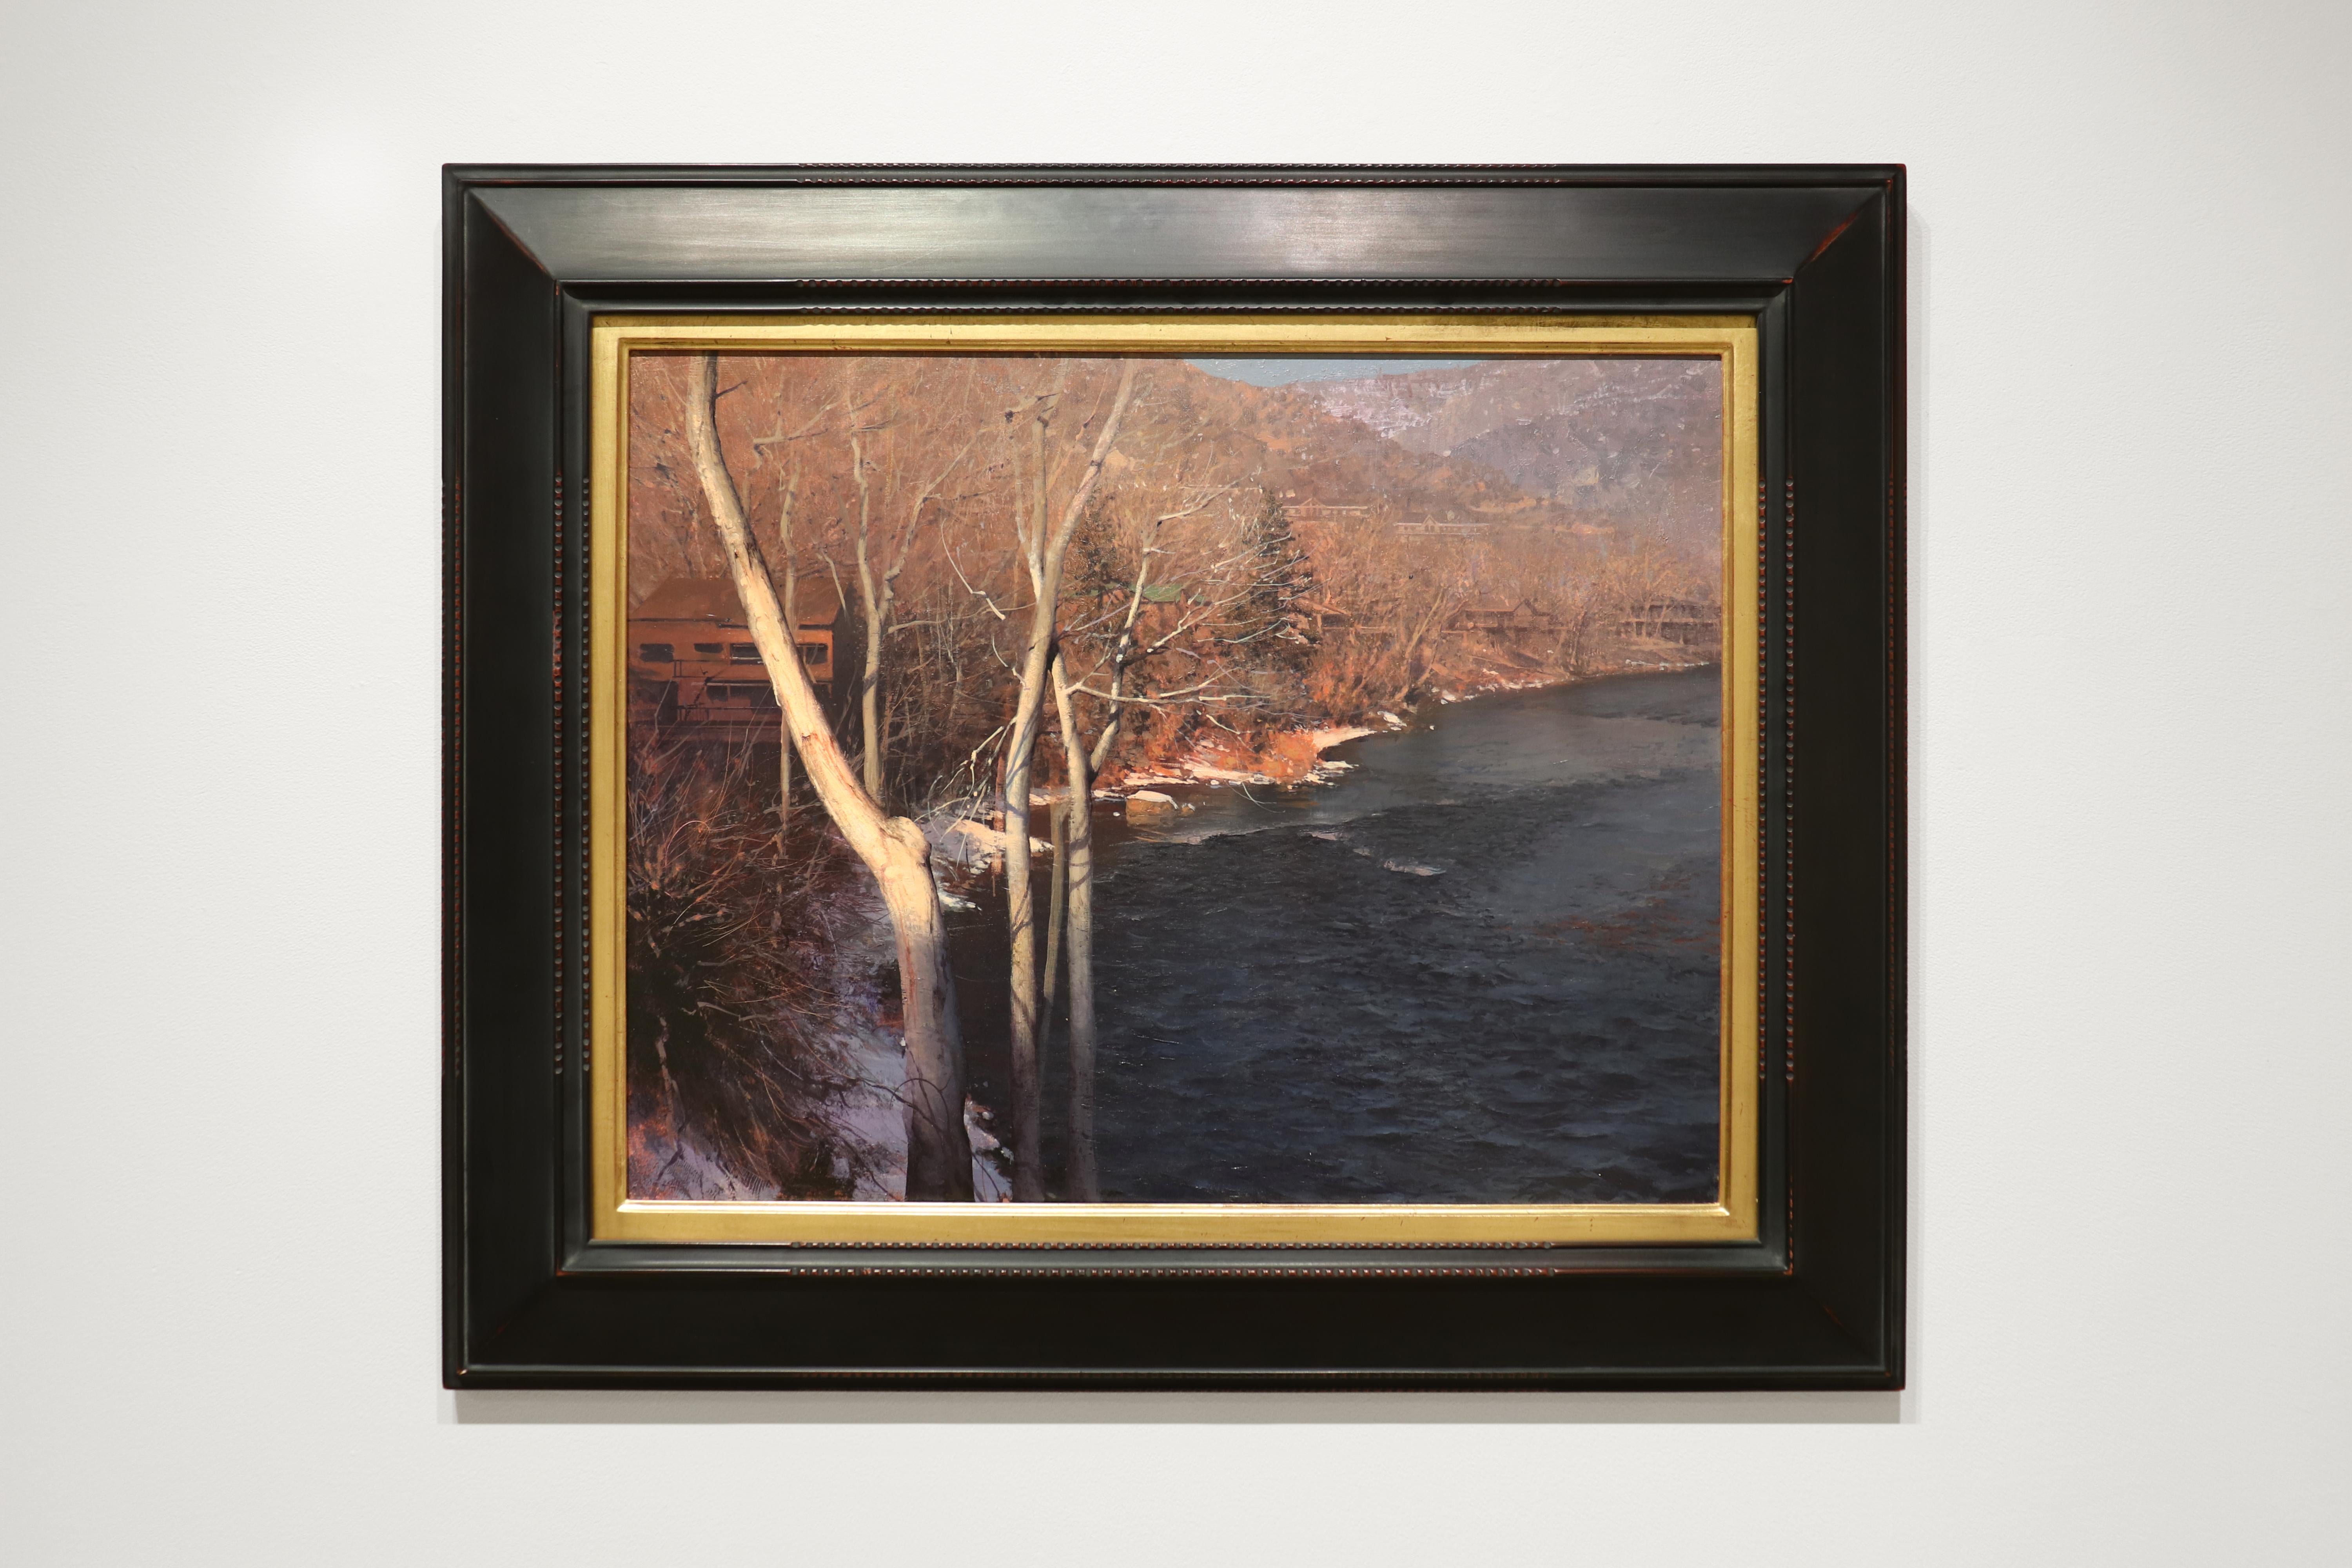 Glenwood Springs, River, Woods, Winter, Snow, Mountains, Landscape - Painting by Daniel Sprick